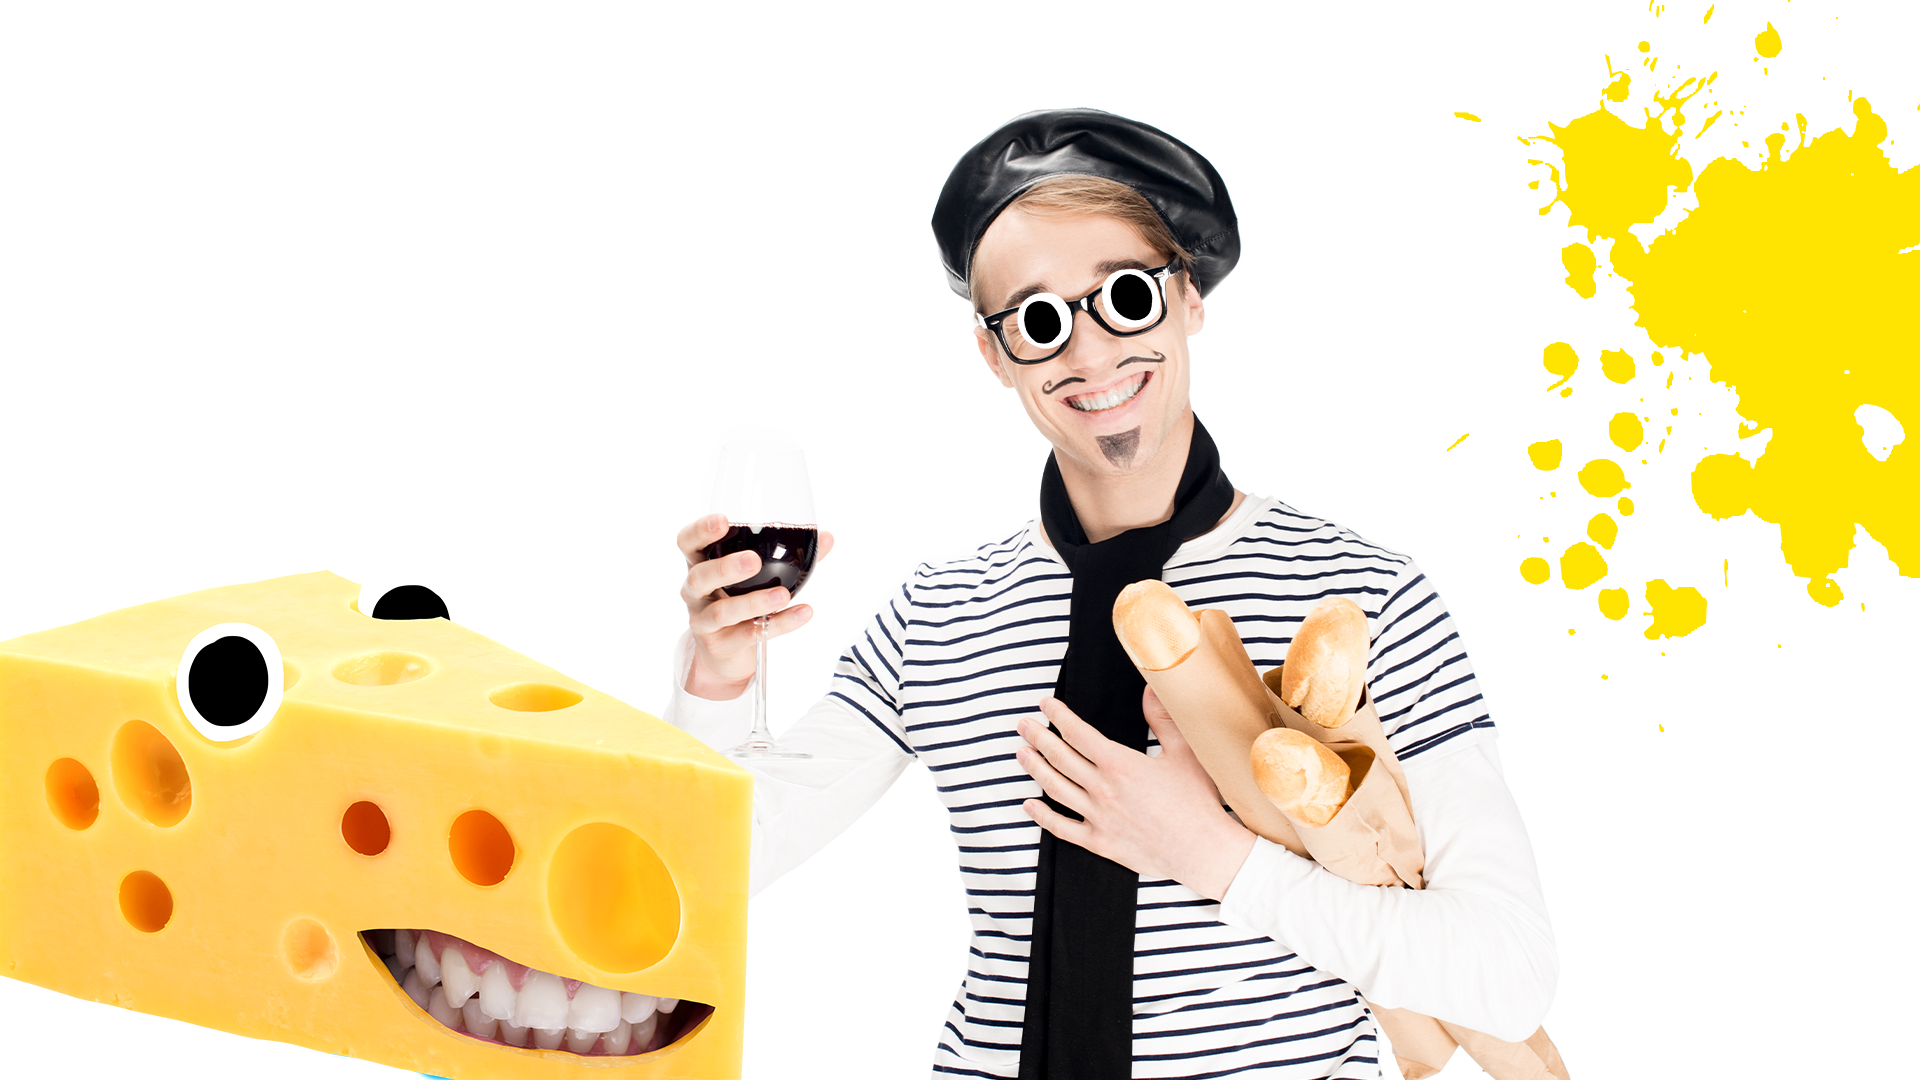 Stereotypical French guy on white background with yellow splat and Beano cheese